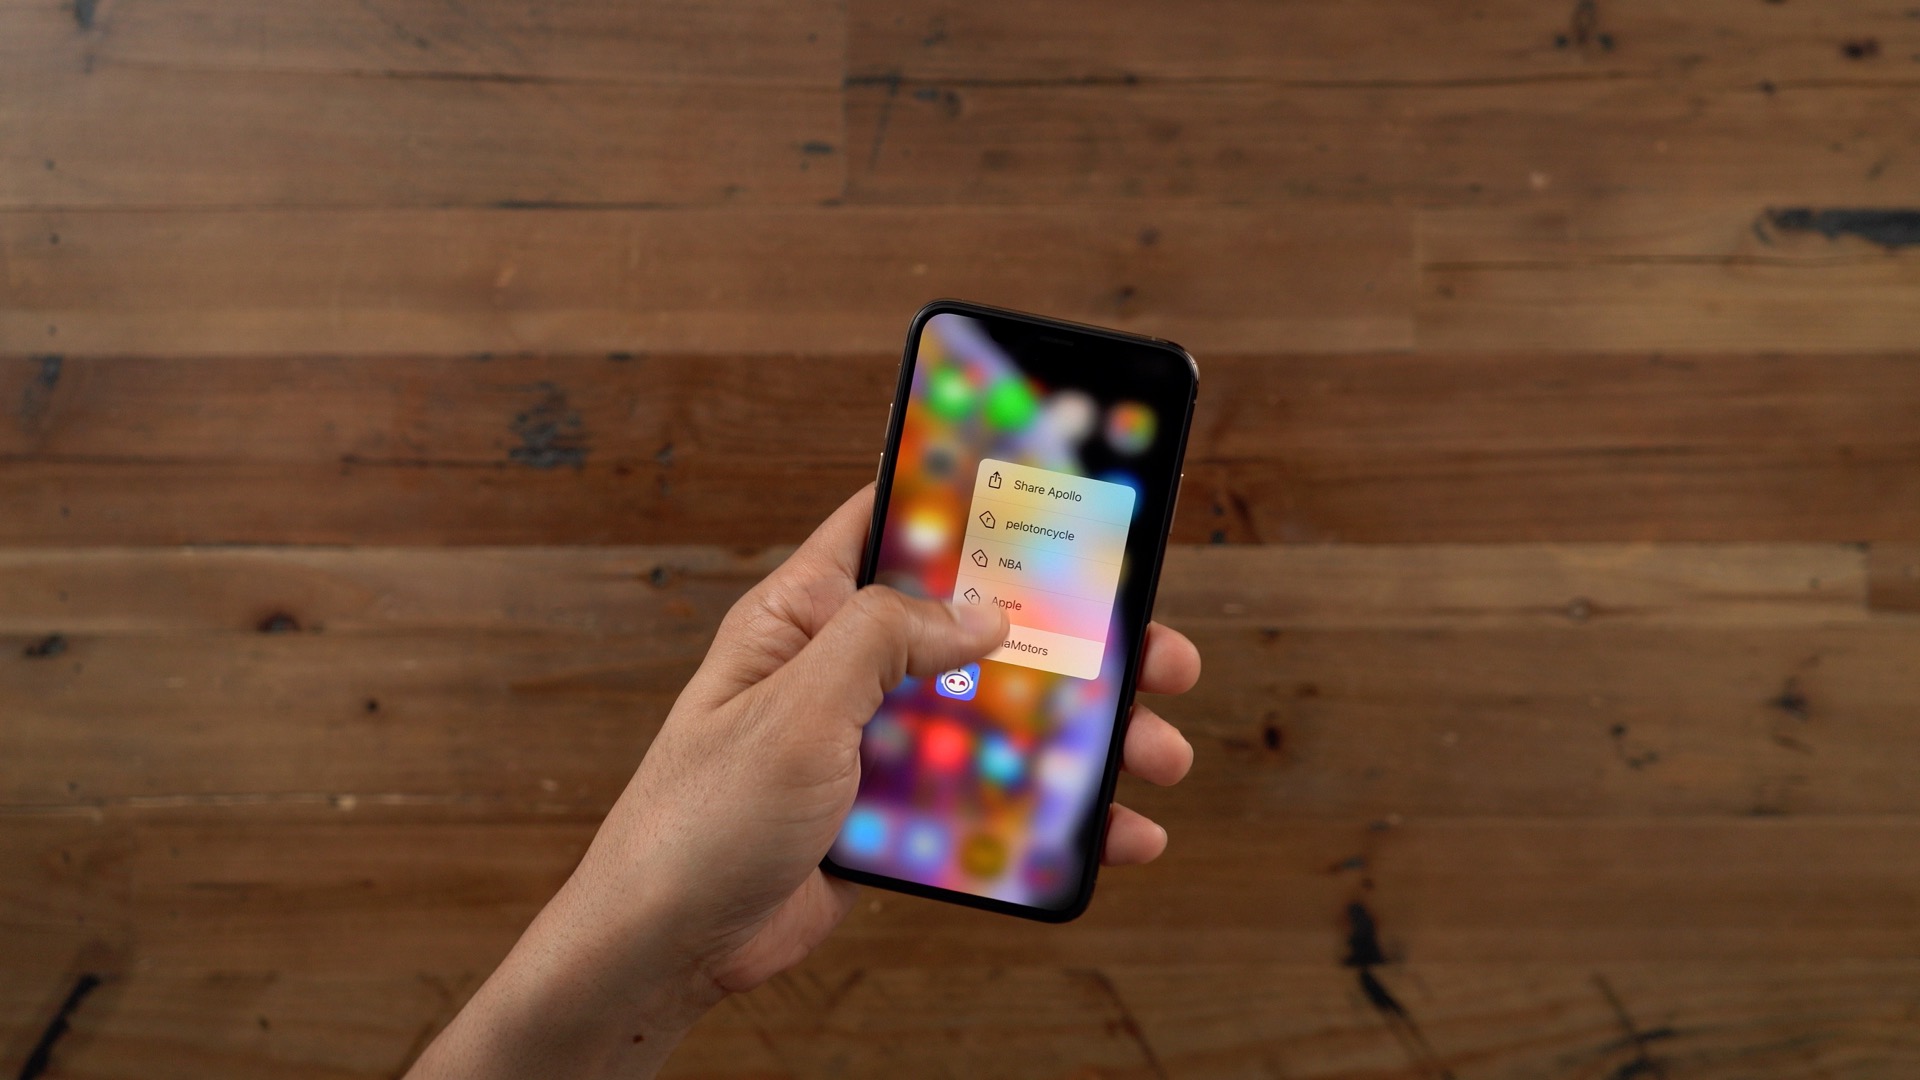 Download and apply 3D Touch Live Wallpapers on your iPhone with these apps  - iOS Hacker